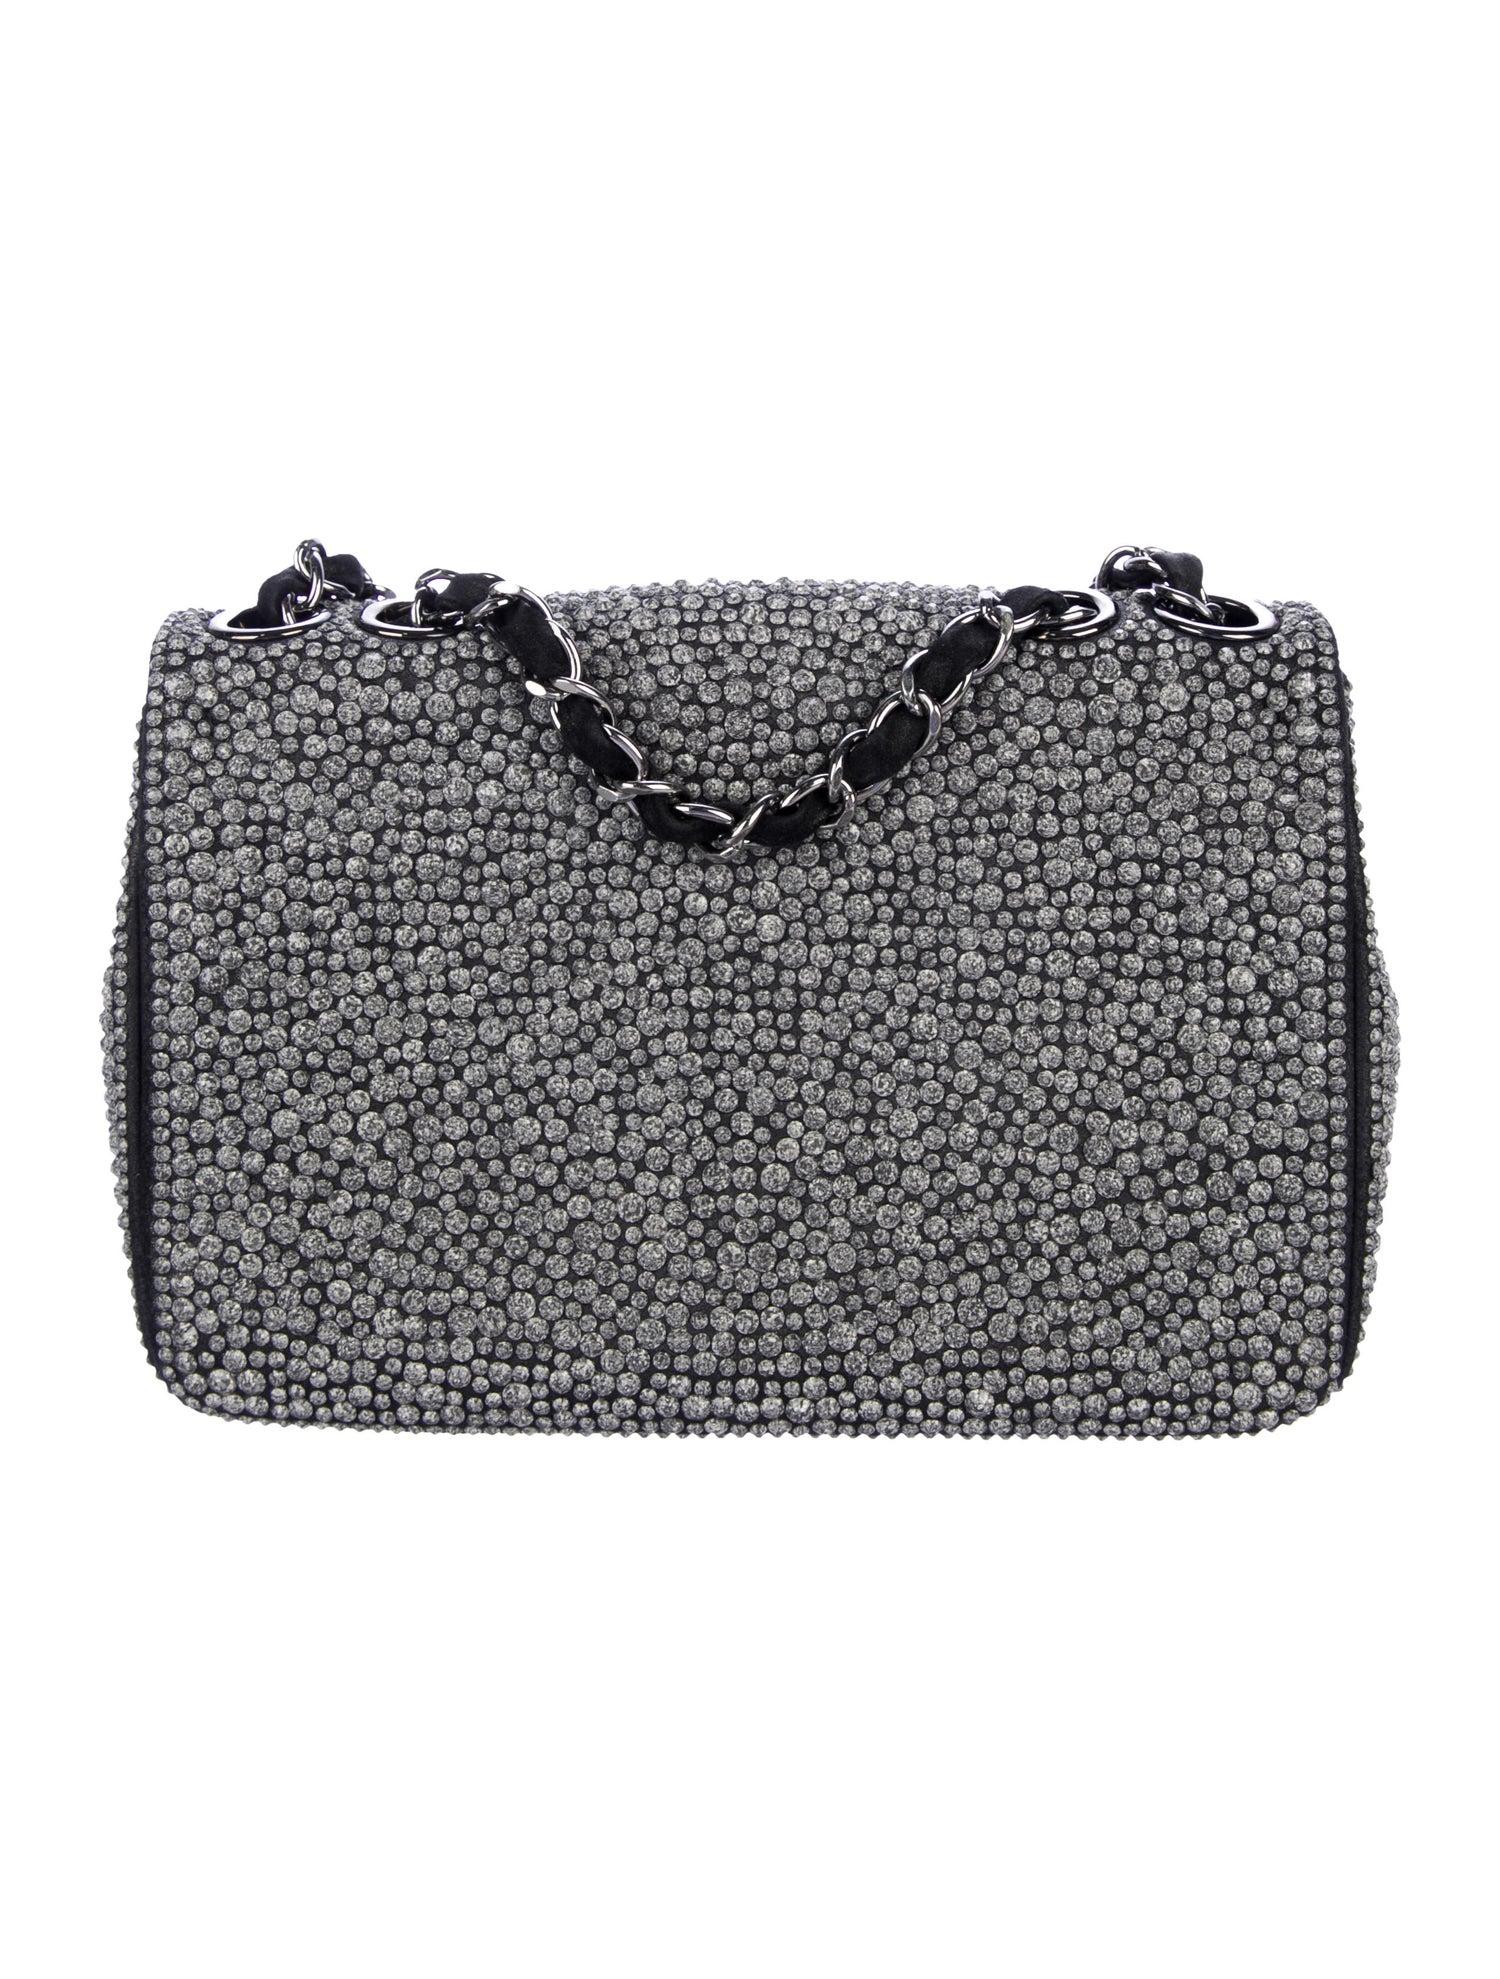 black suede bag with silver chain